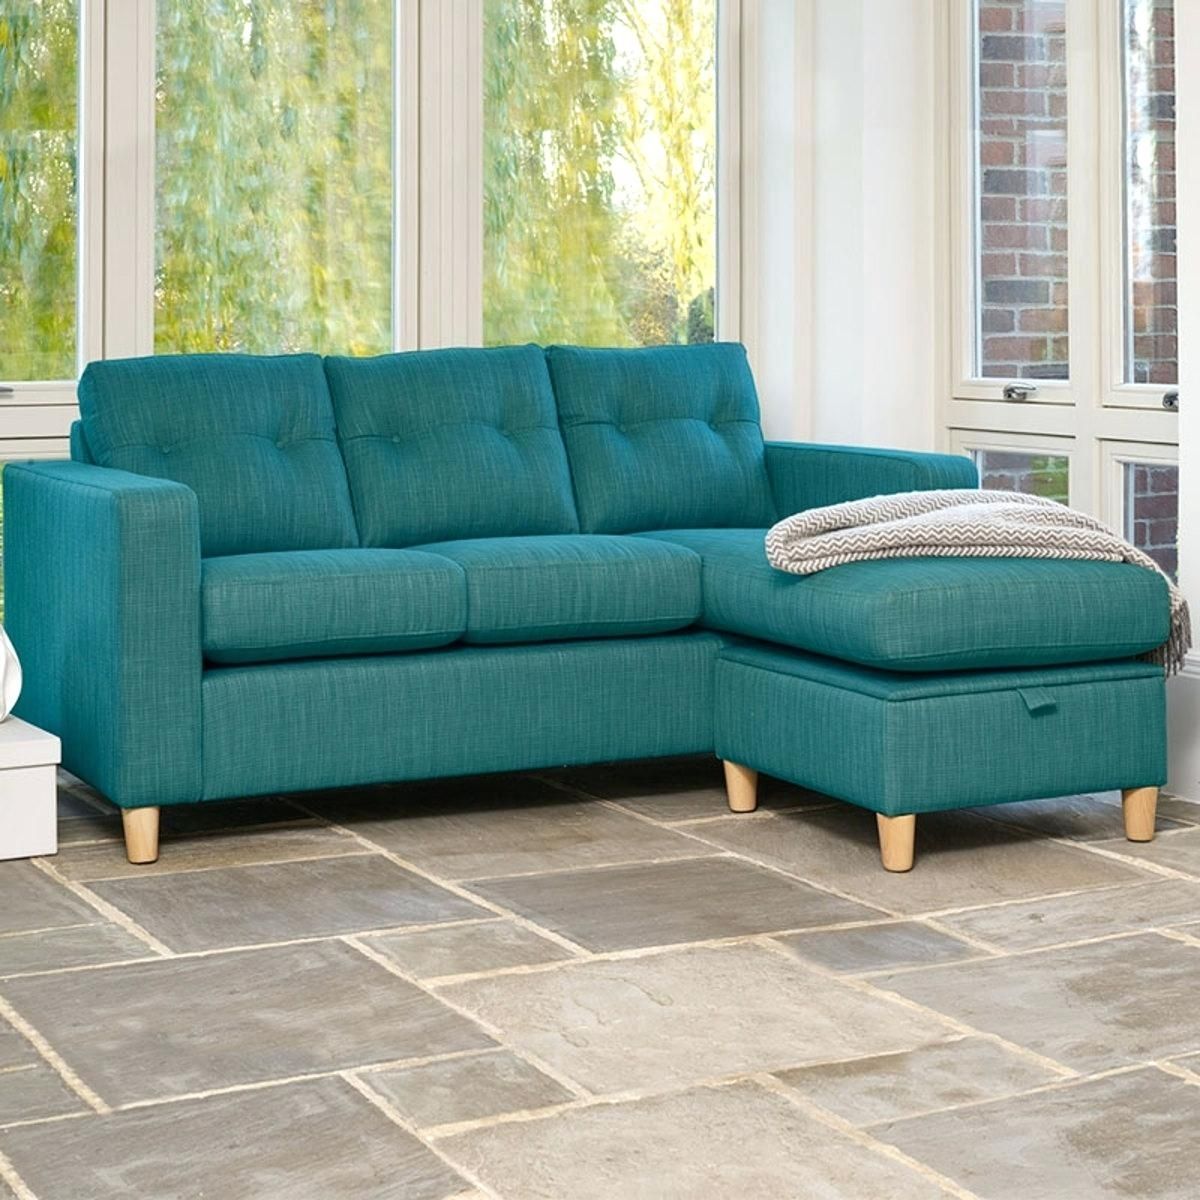 Teal Sofa Bed Target Sectional Sofas For Sale With Regard To Target Sectional Sofas (View 9 of 10)